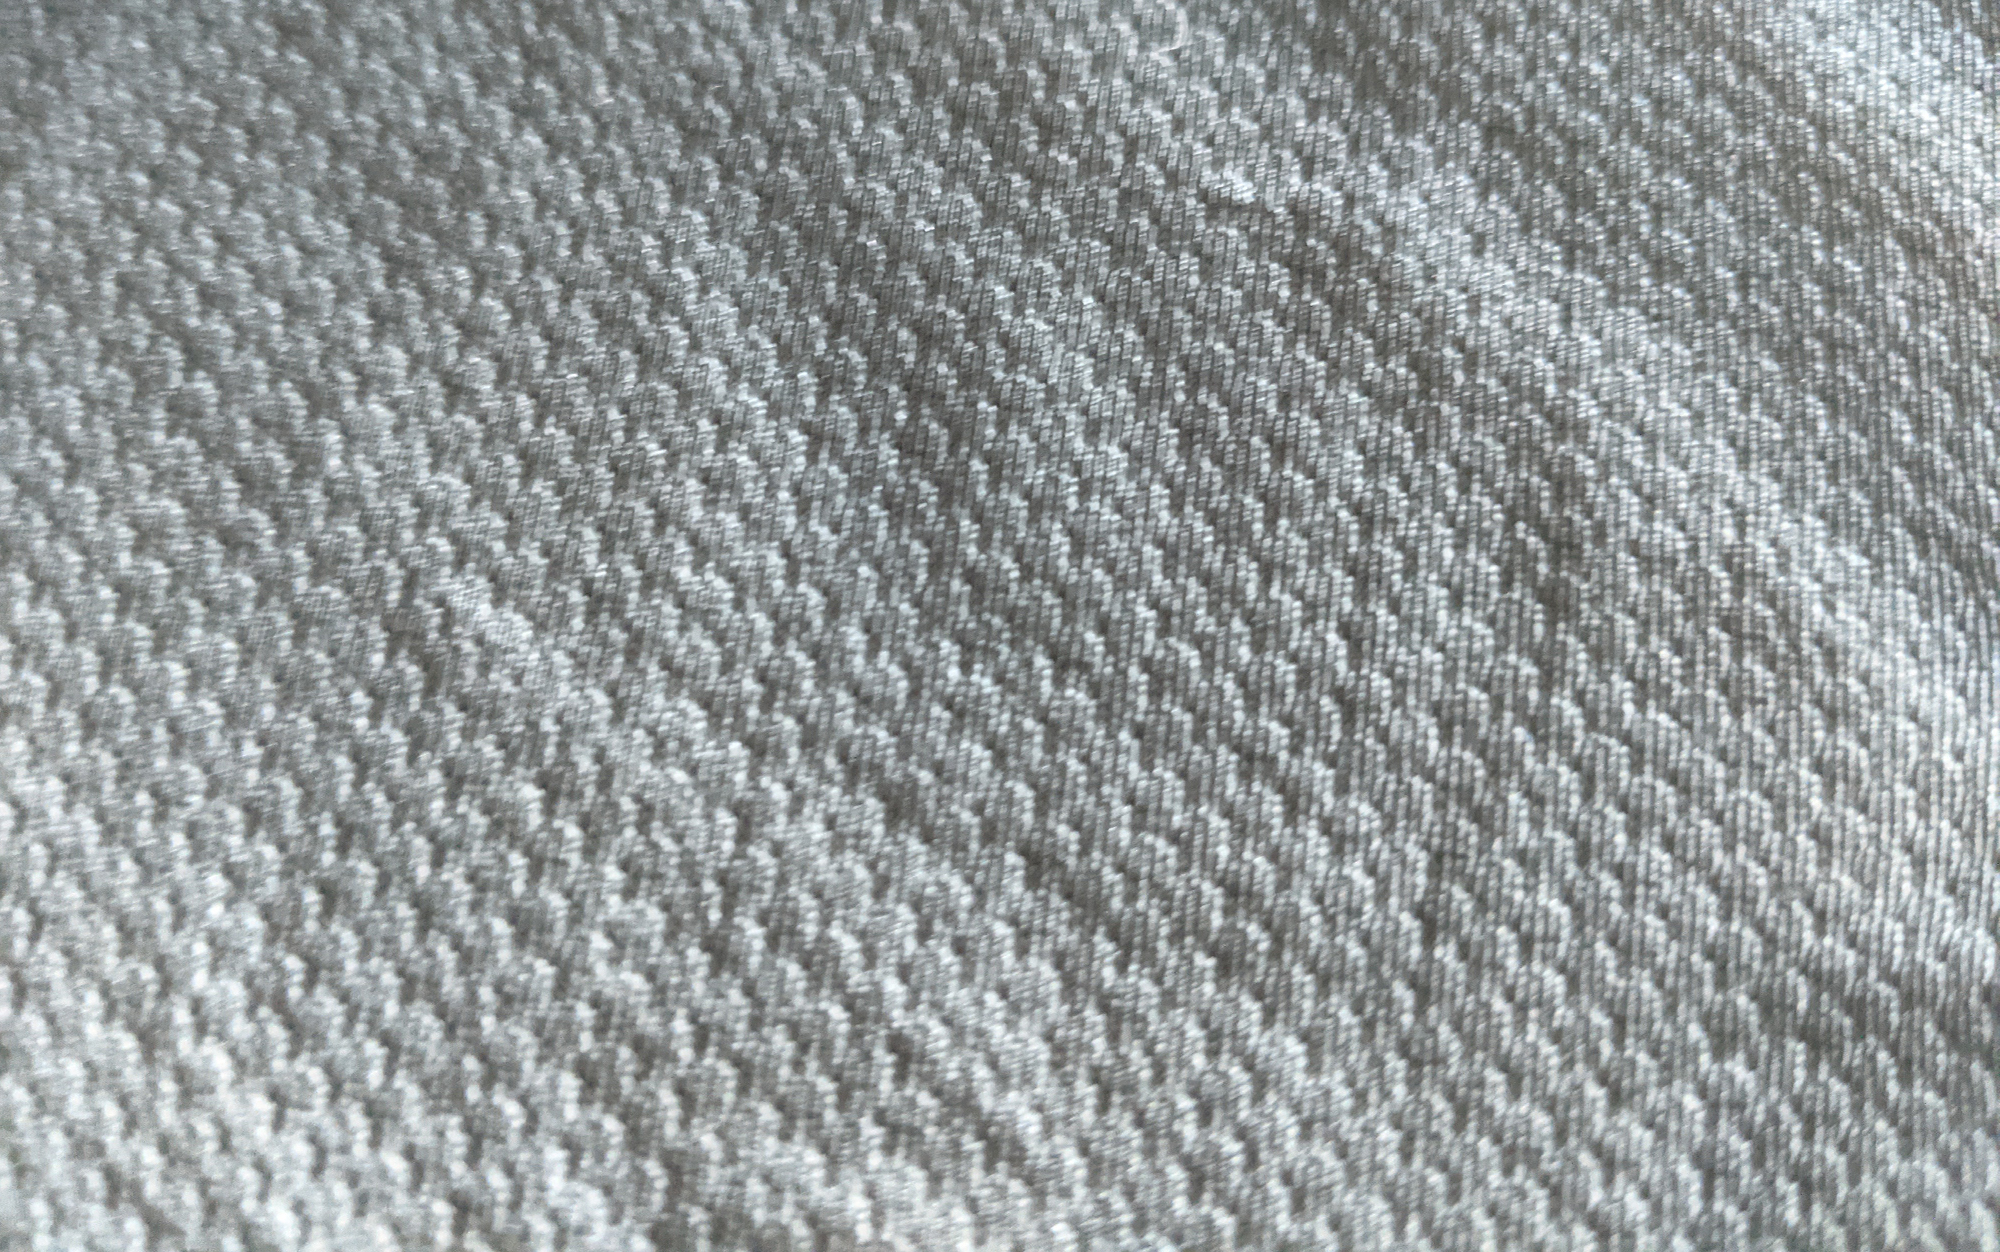 Here is a close up of the Beyond Hooded Geo-T knit.